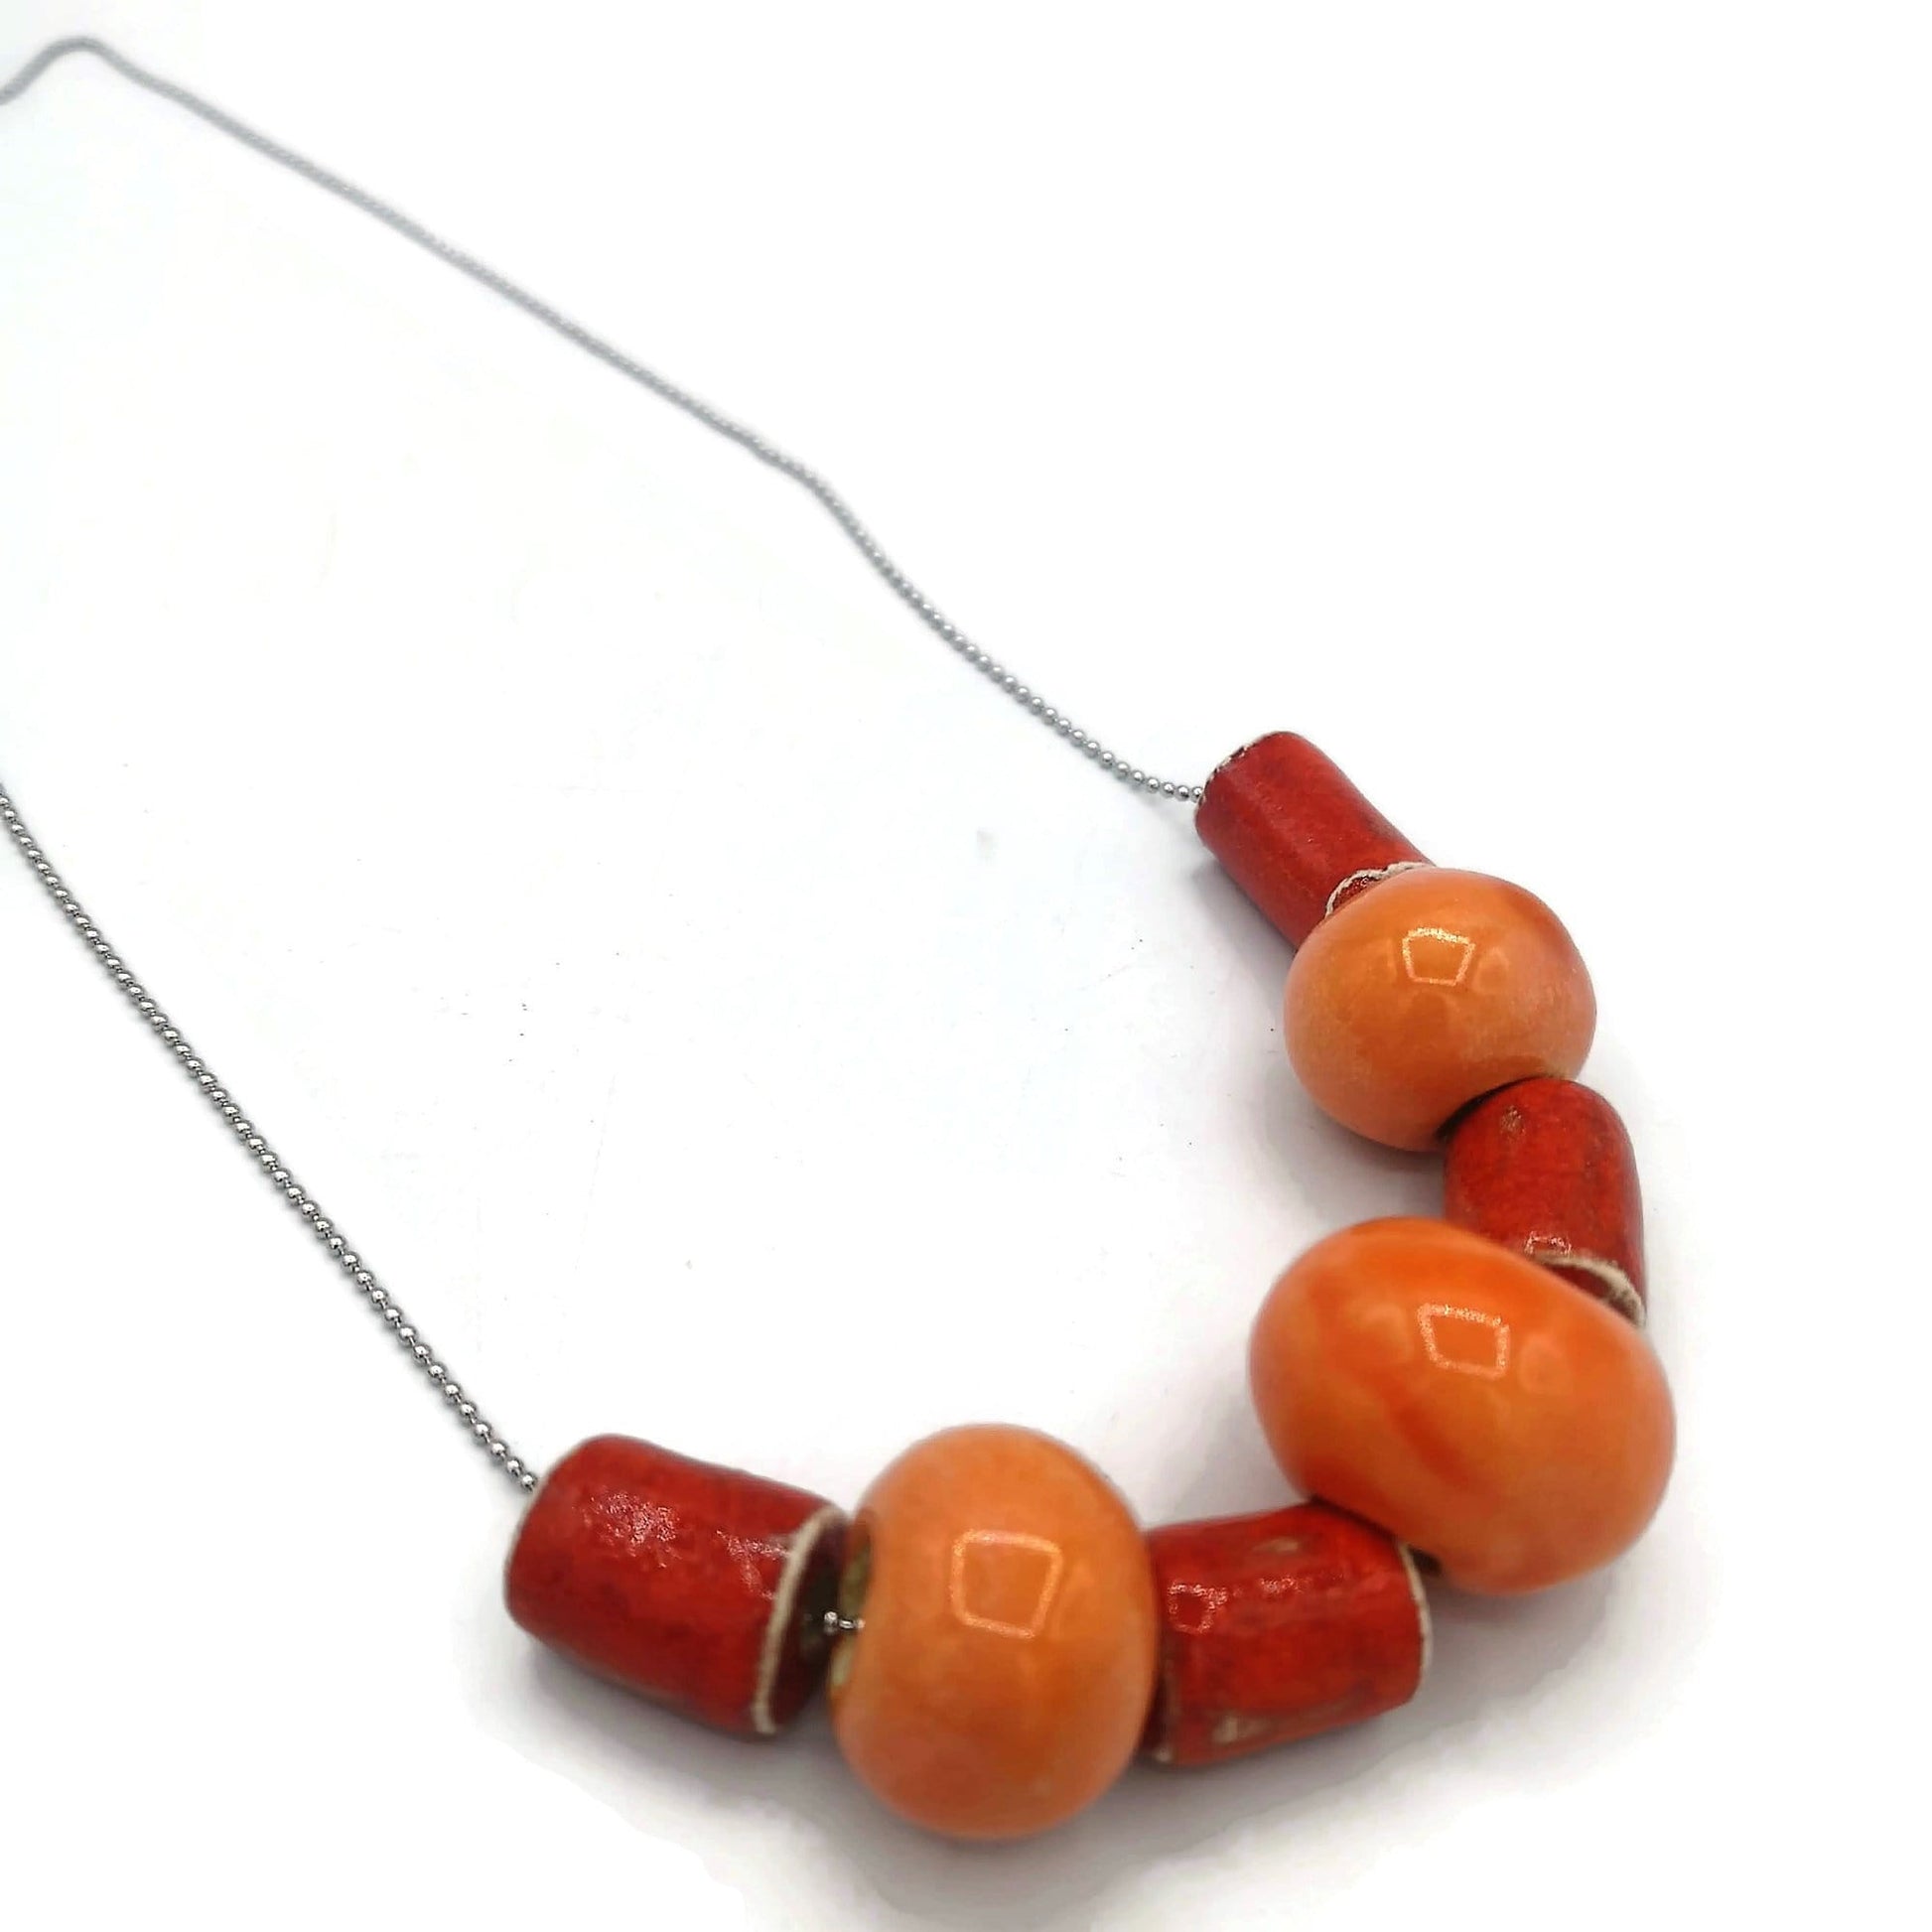 Large Red And Orange Beaded Statement Necklace For Women, Everyday Aesthetic Necklace, Best Gifts For Her, Handmade Ceramic Jewelry - Ceramica Ana Rafael